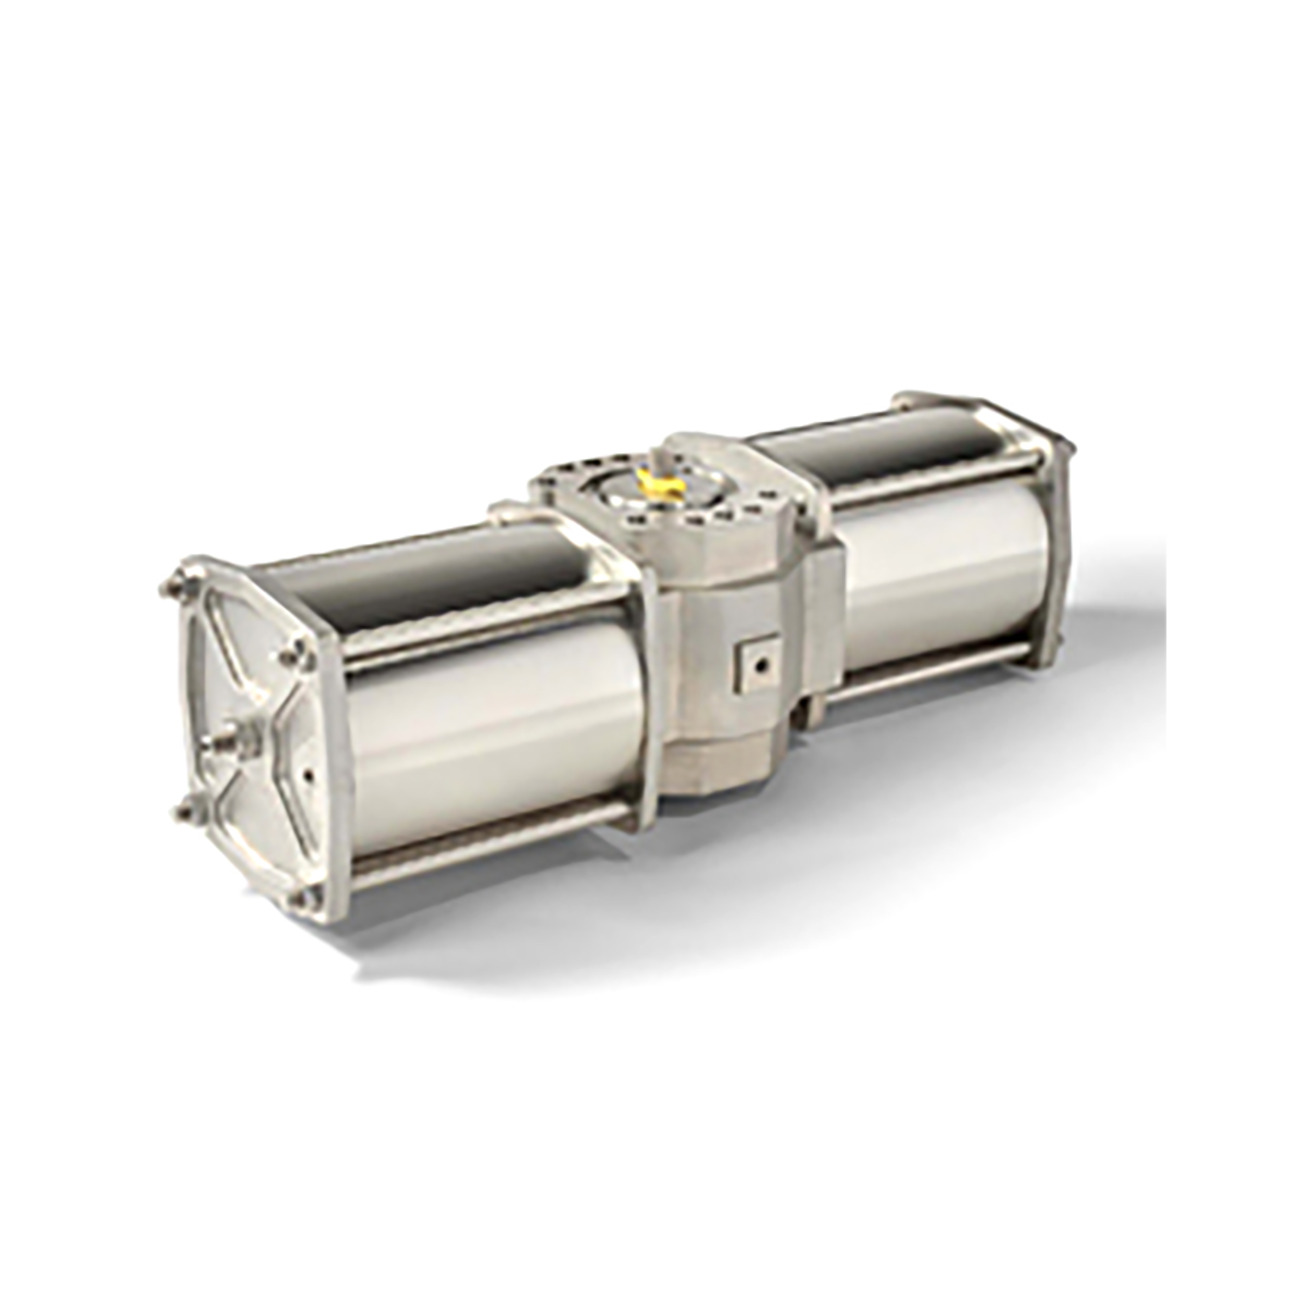 QTRCO Actuators for Food and Beverage Applications